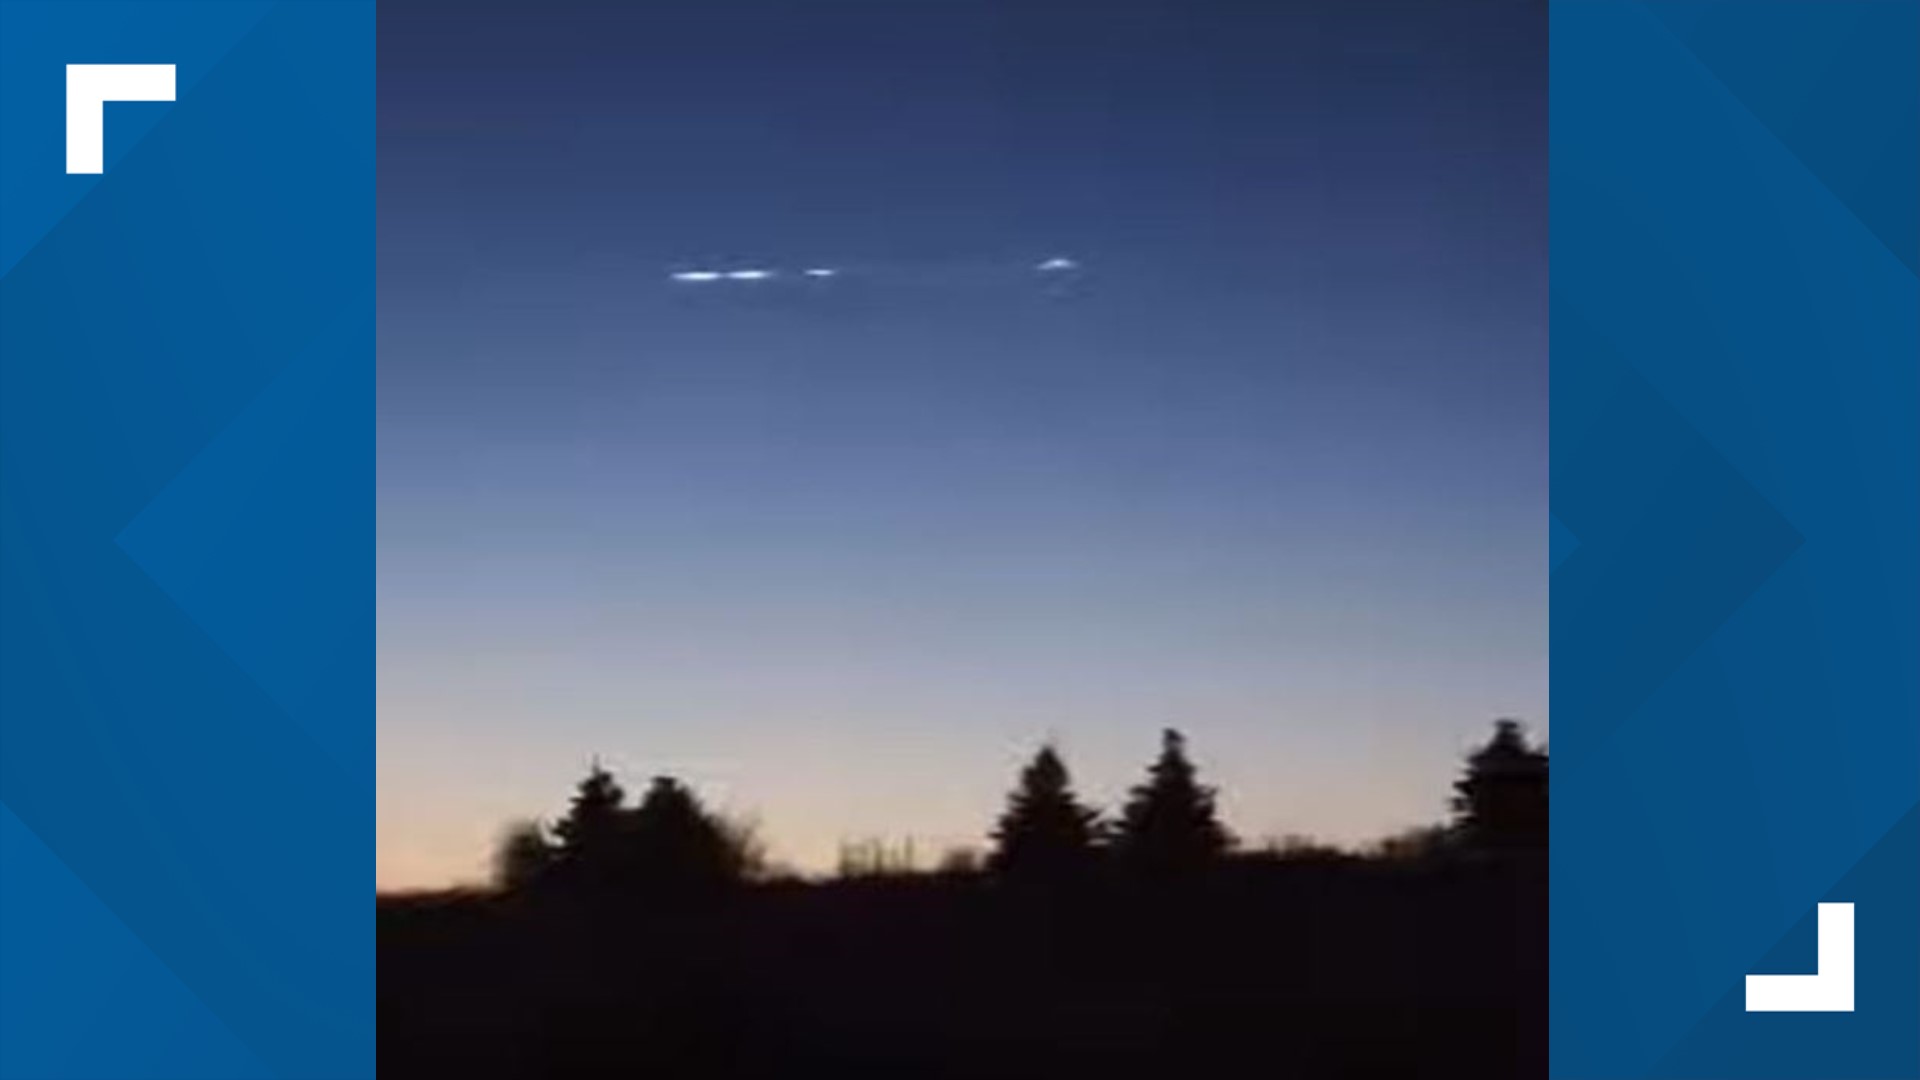 The American Meteor Society documented 47 reports of the "fireball" seen over Idaho, Montana, Oregon and Wyoming between 8:10 p.m. and 10:34 p.m. MT Tuesday.